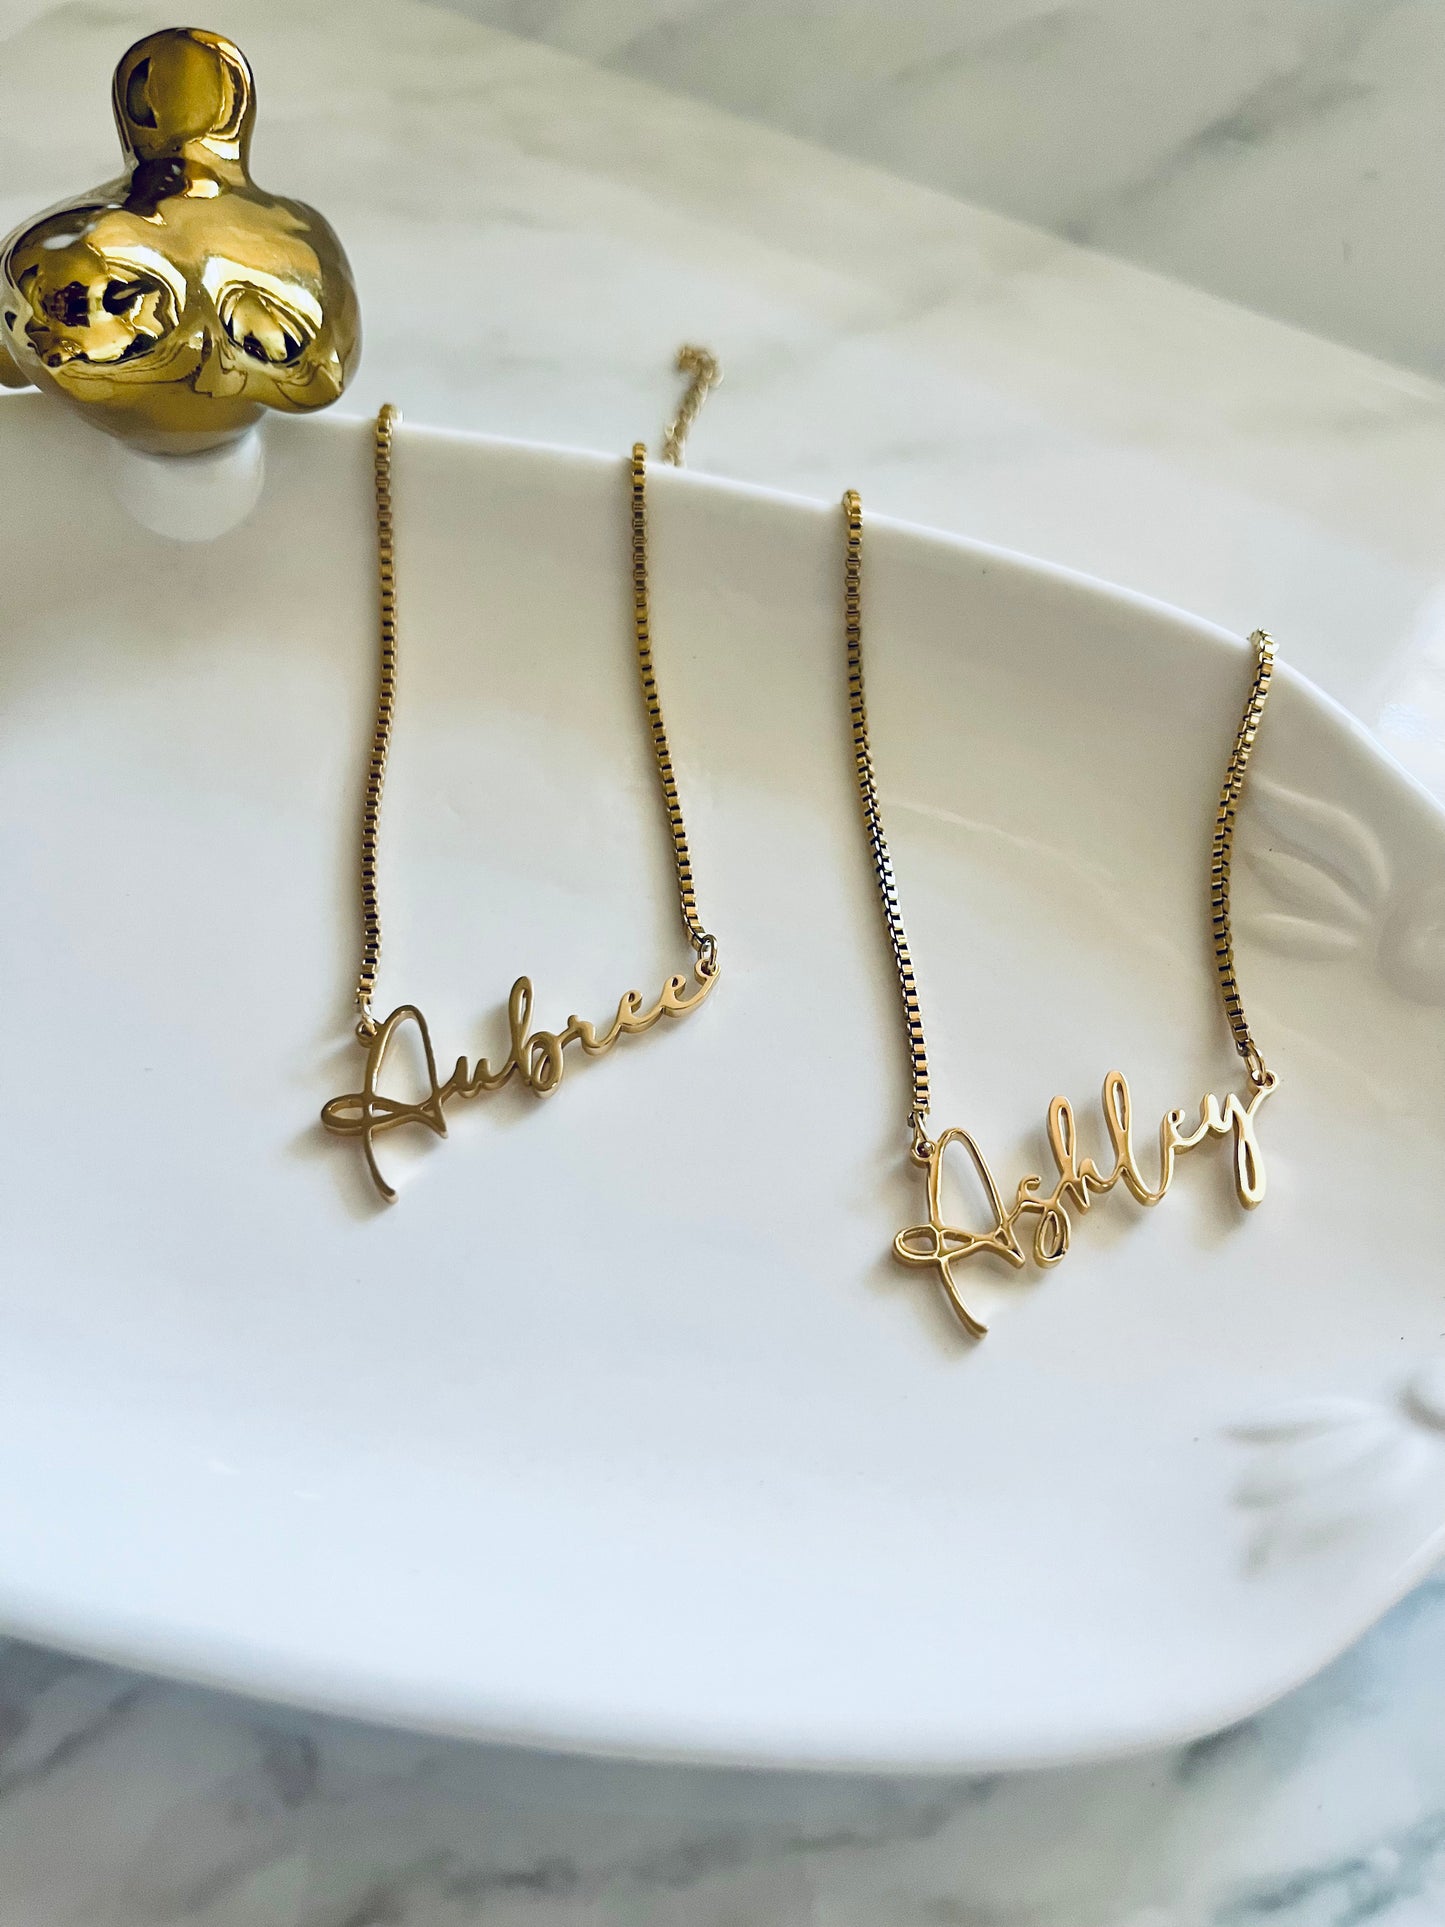 Blakely Style Name Necklace